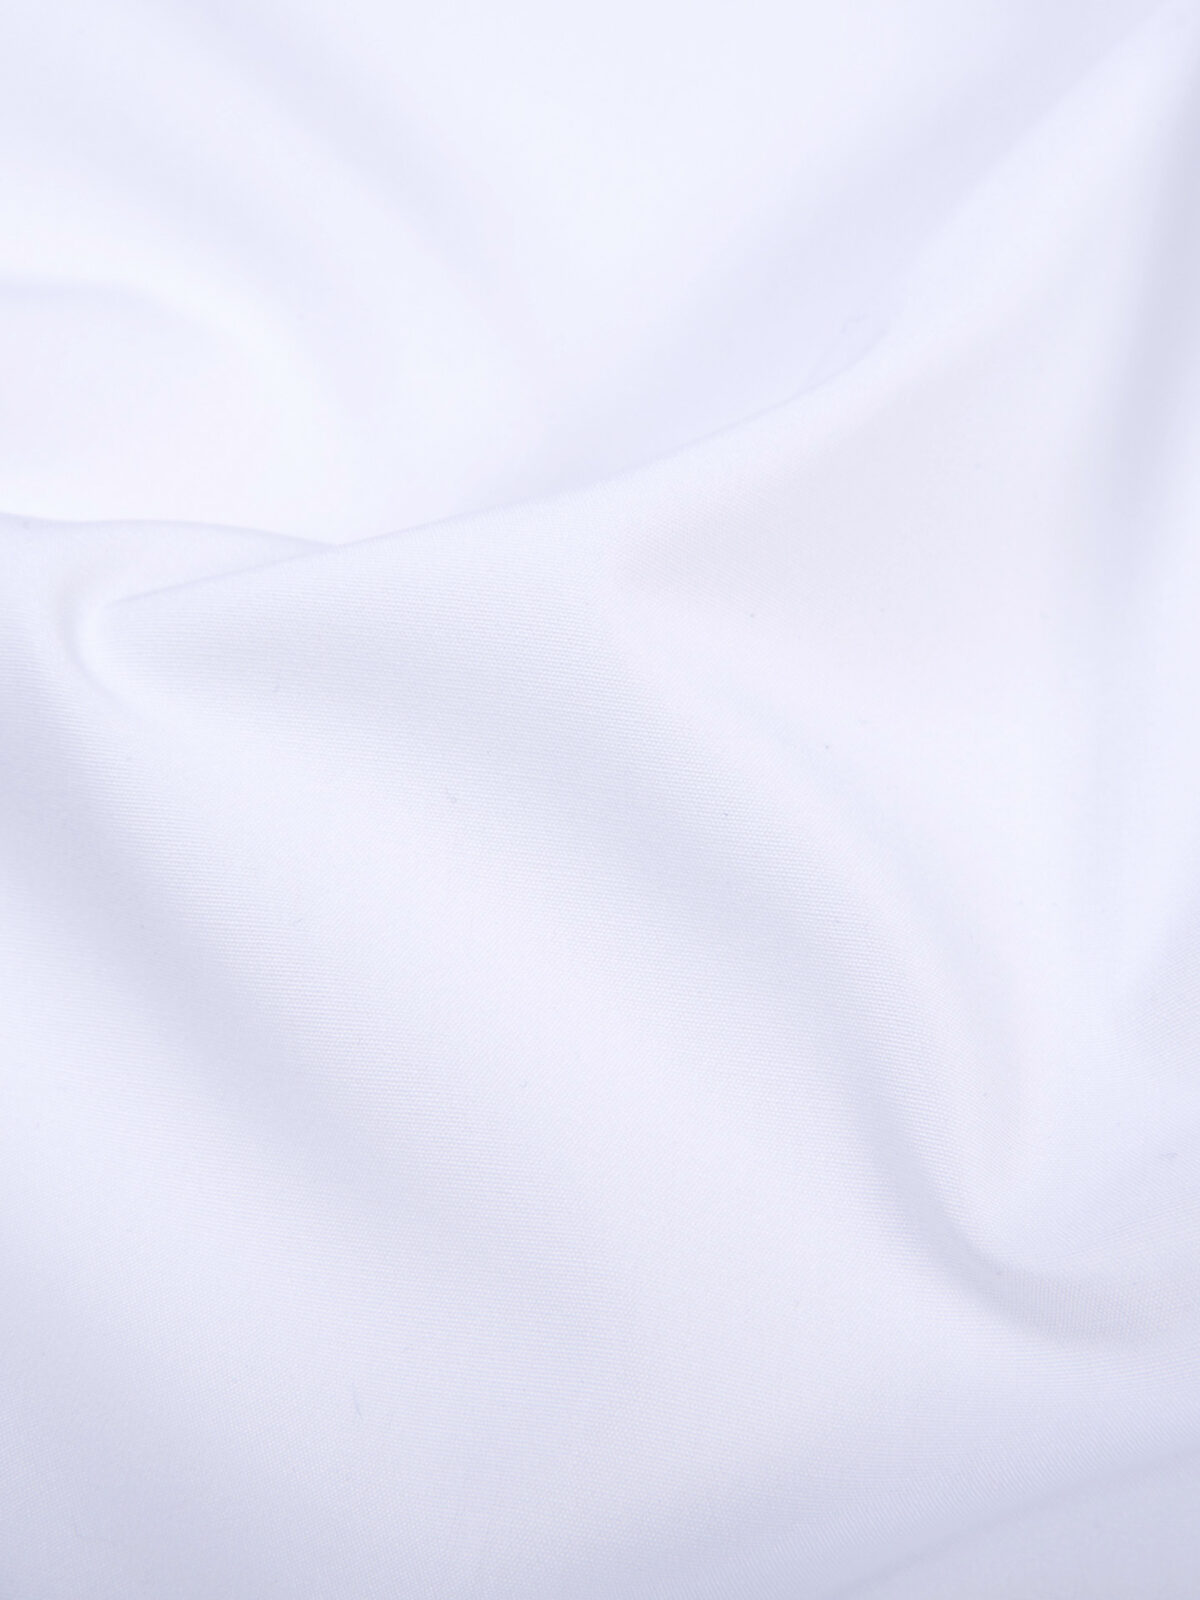 Stanton 120s White Broadcloth Shirts by Proper Cloth